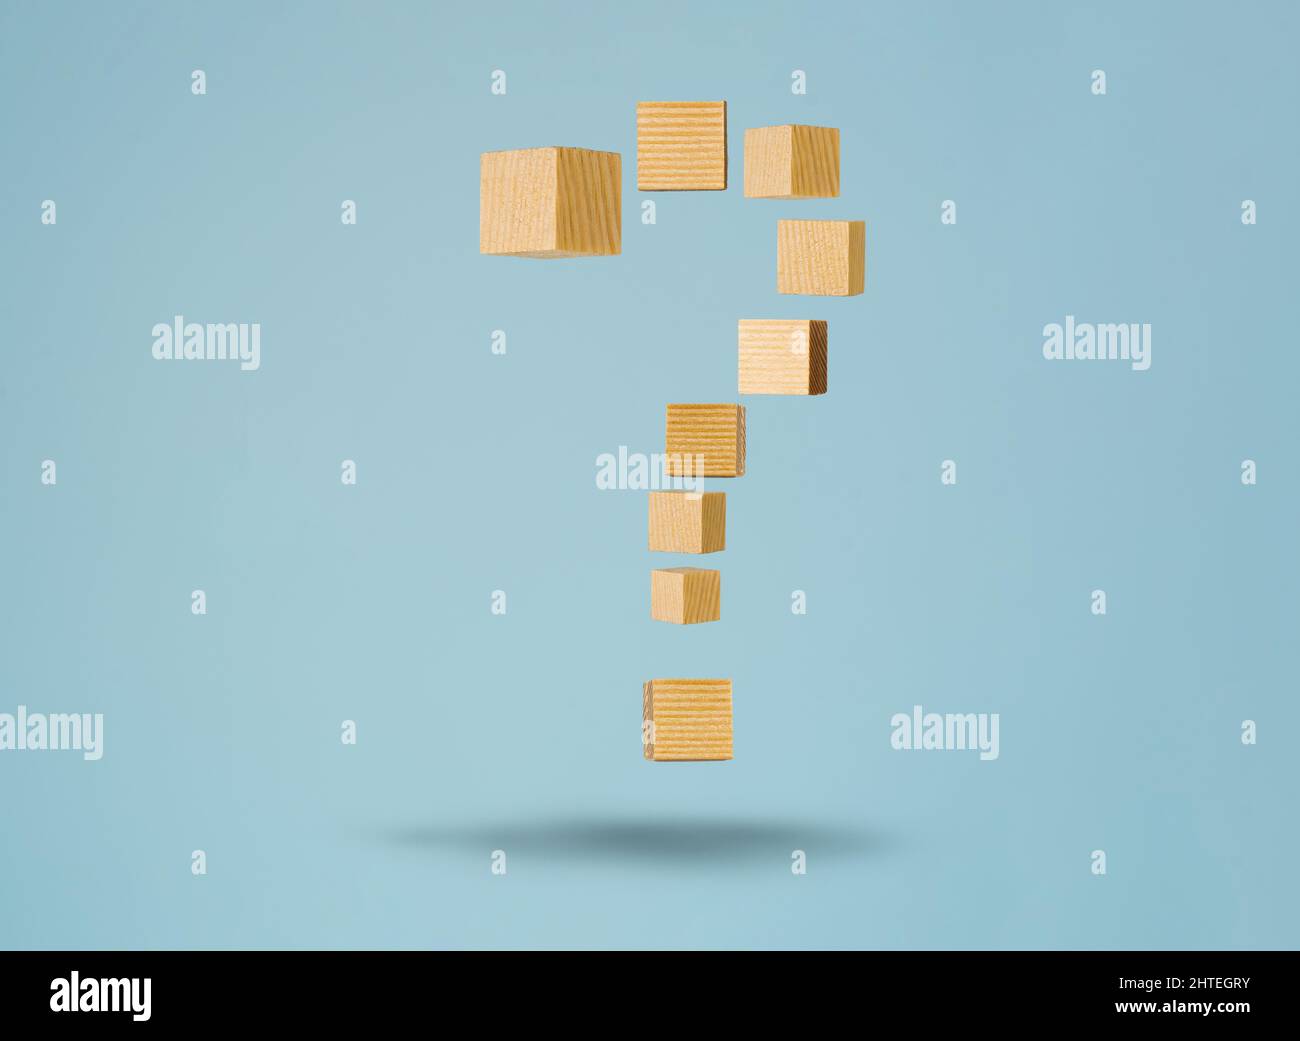 Floating question sign made of wooden blocks. Concept of FAQ and solving problem by providing information and answer. Stock Photo